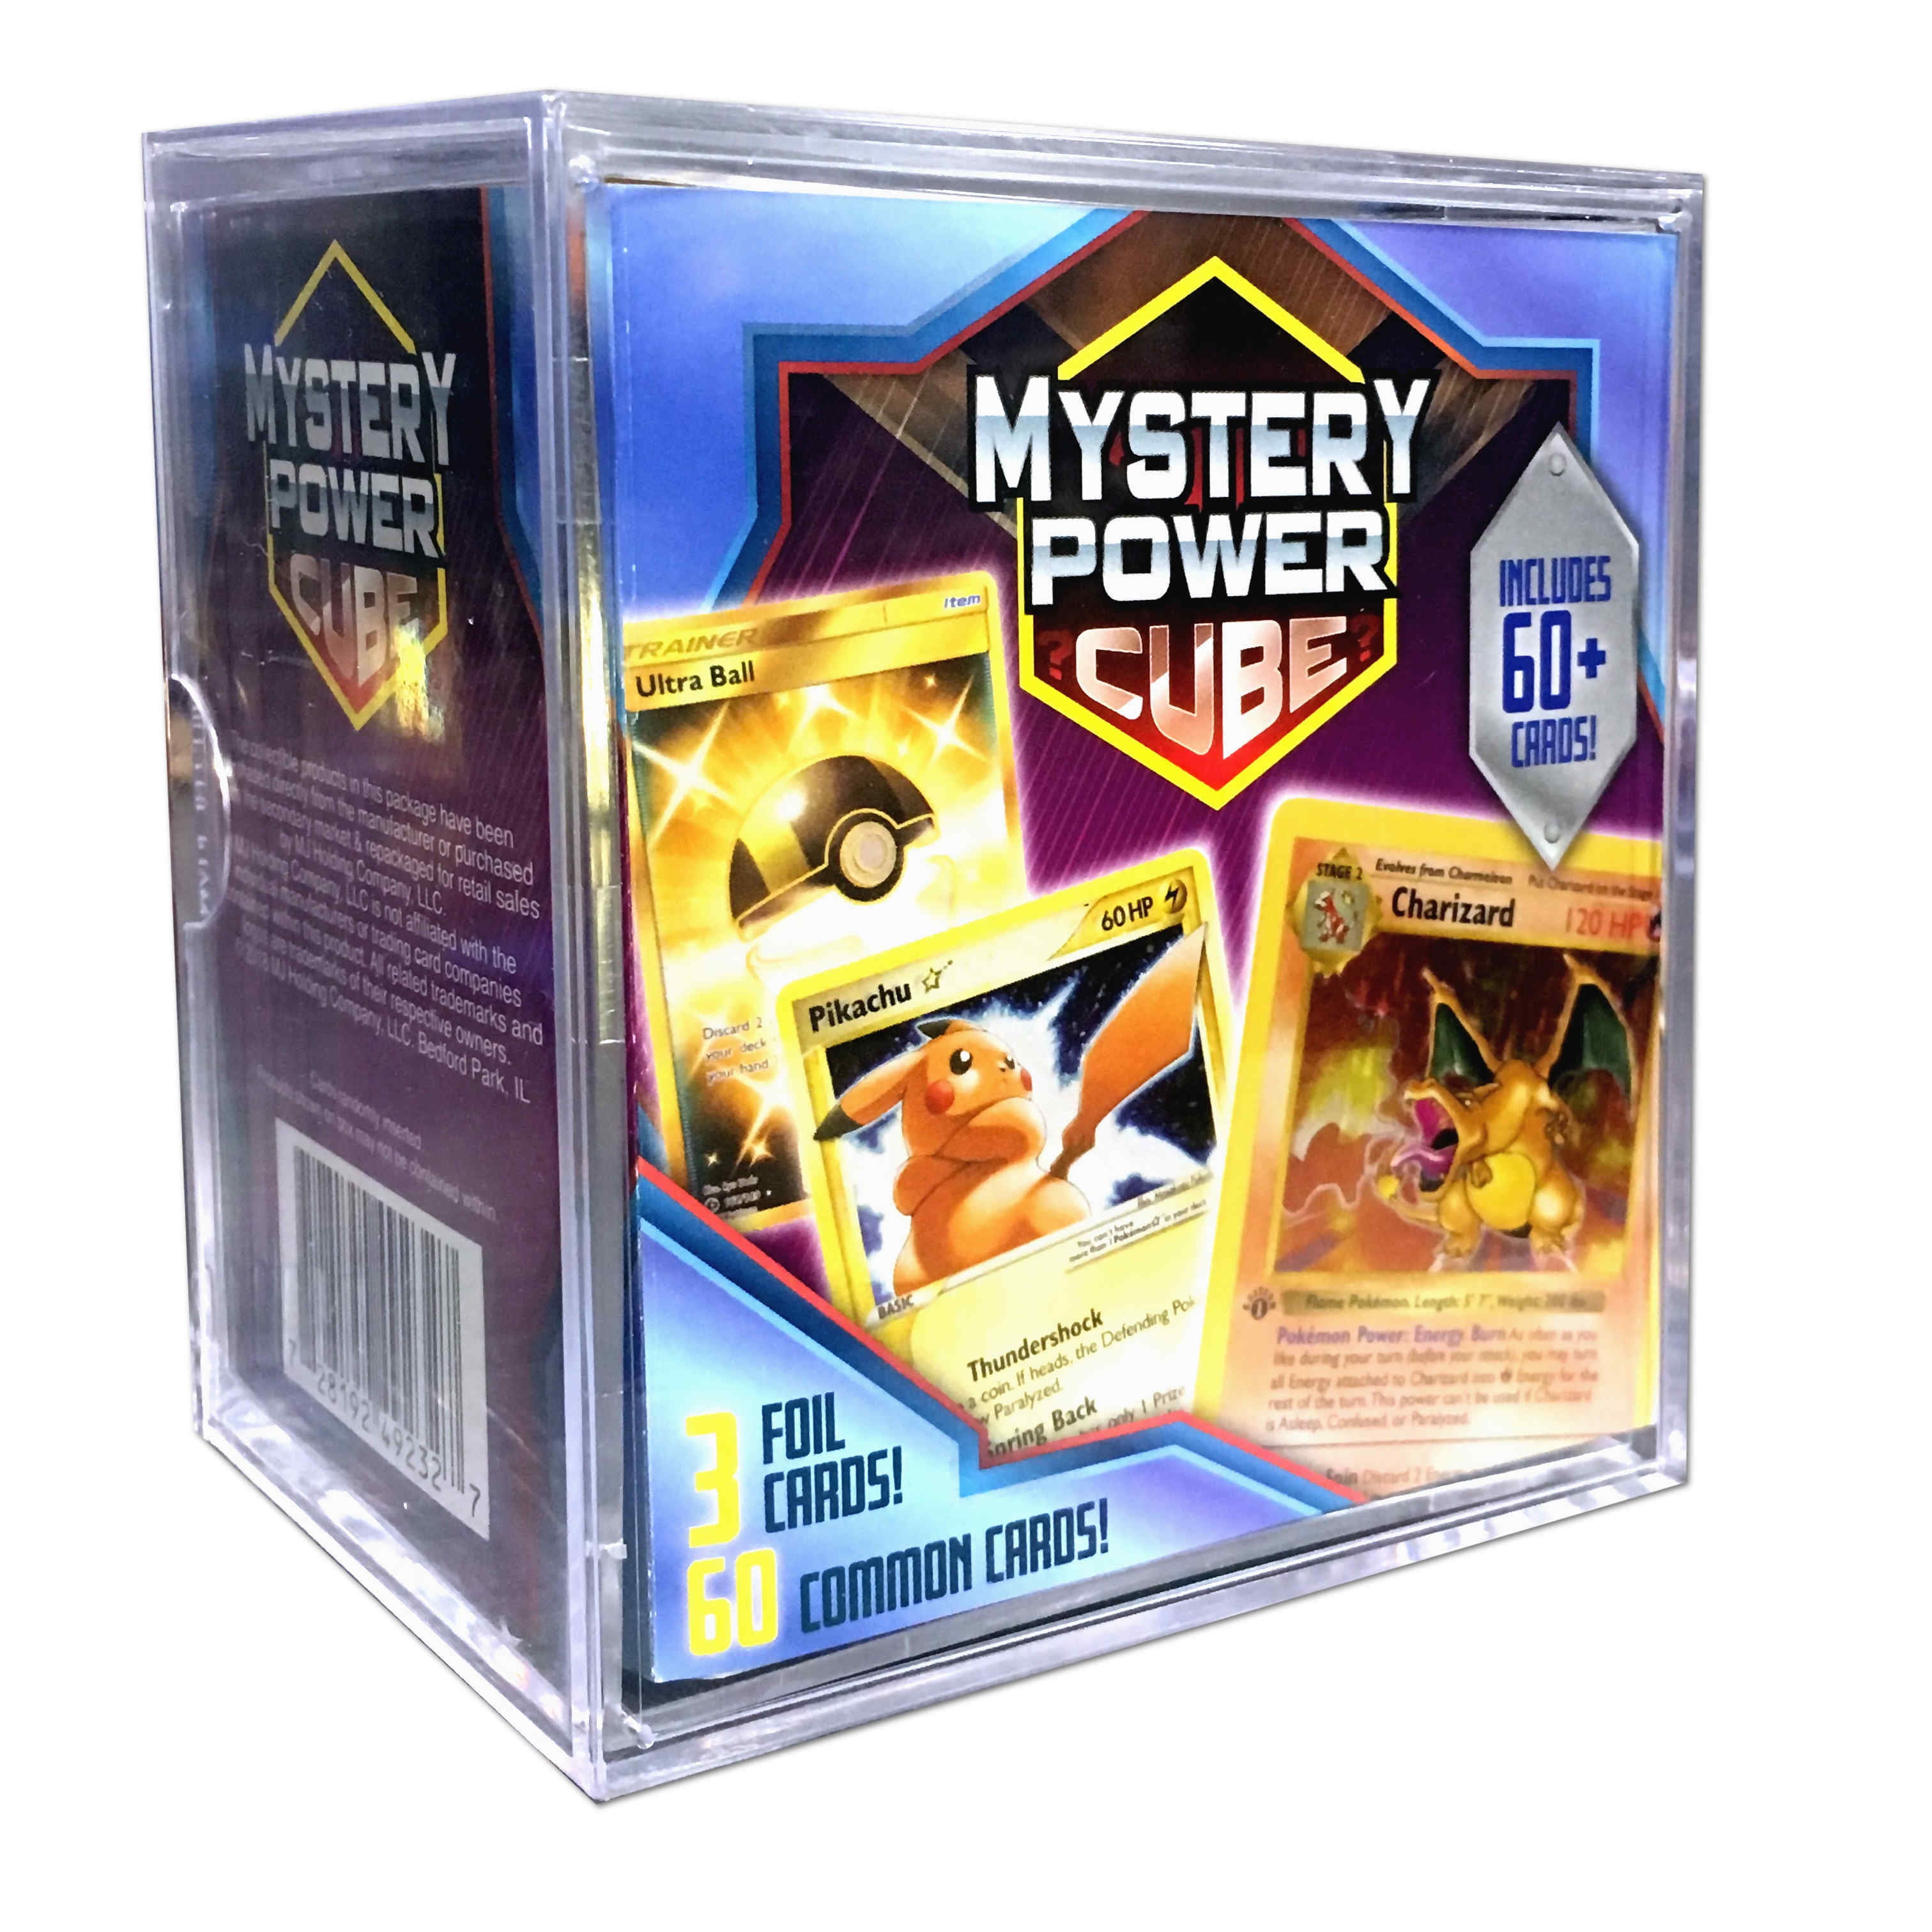 Pack of 60 Cards for sale online Pokemon Mystery Power Cube 2020 Ultra RARE